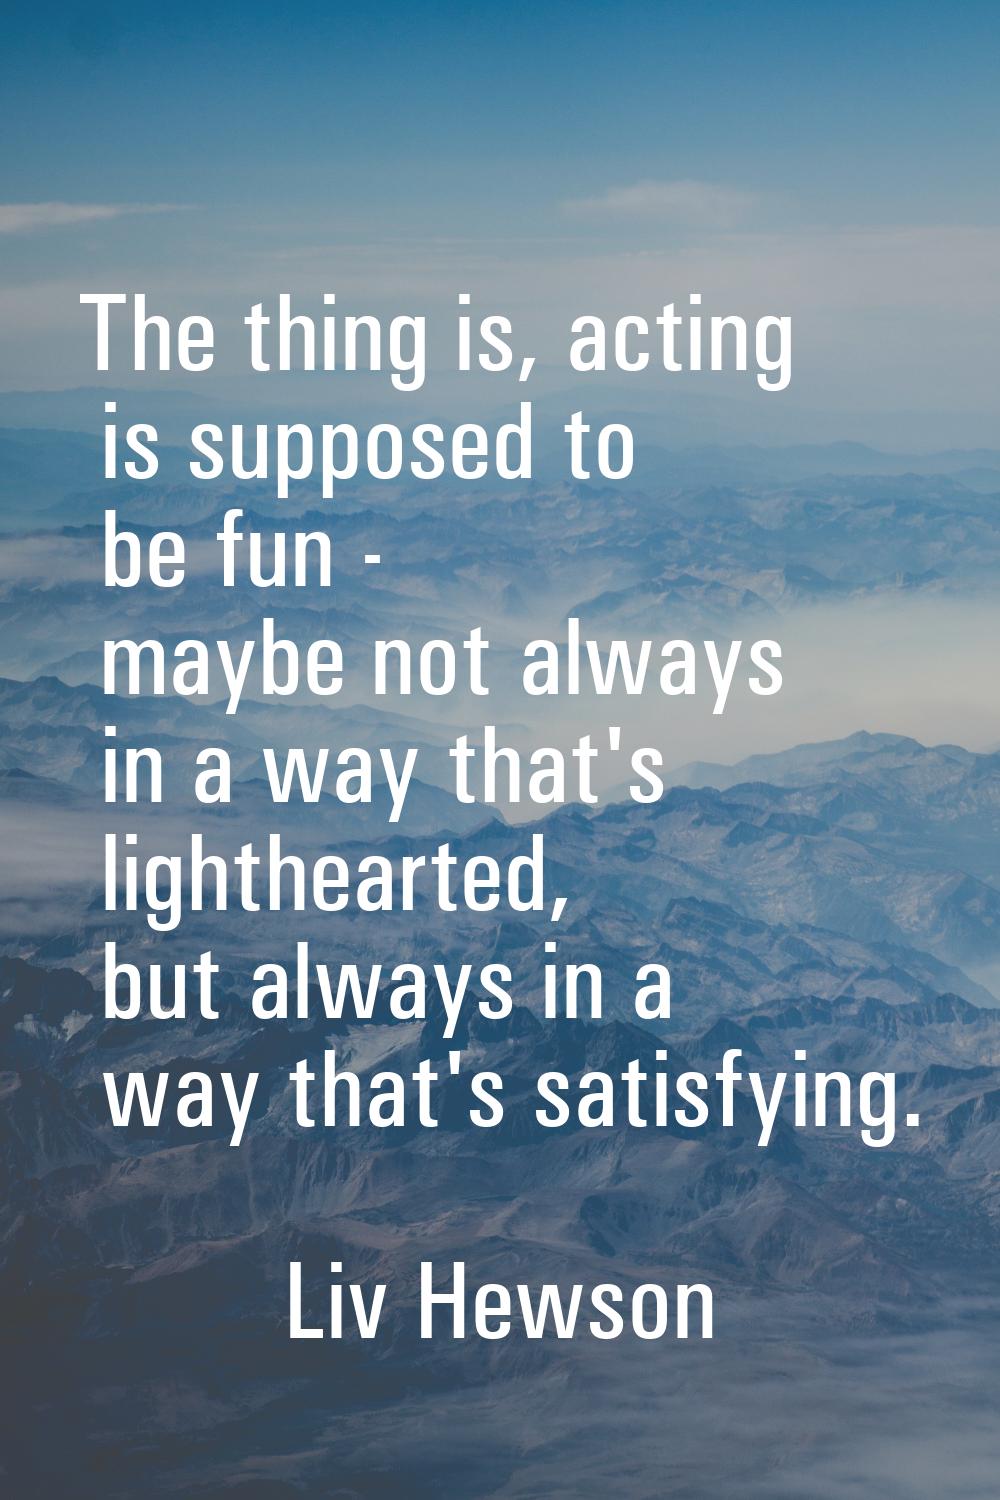 The thing is, acting is supposed to be fun - maybe not always in a way that's lighthearted, but alw